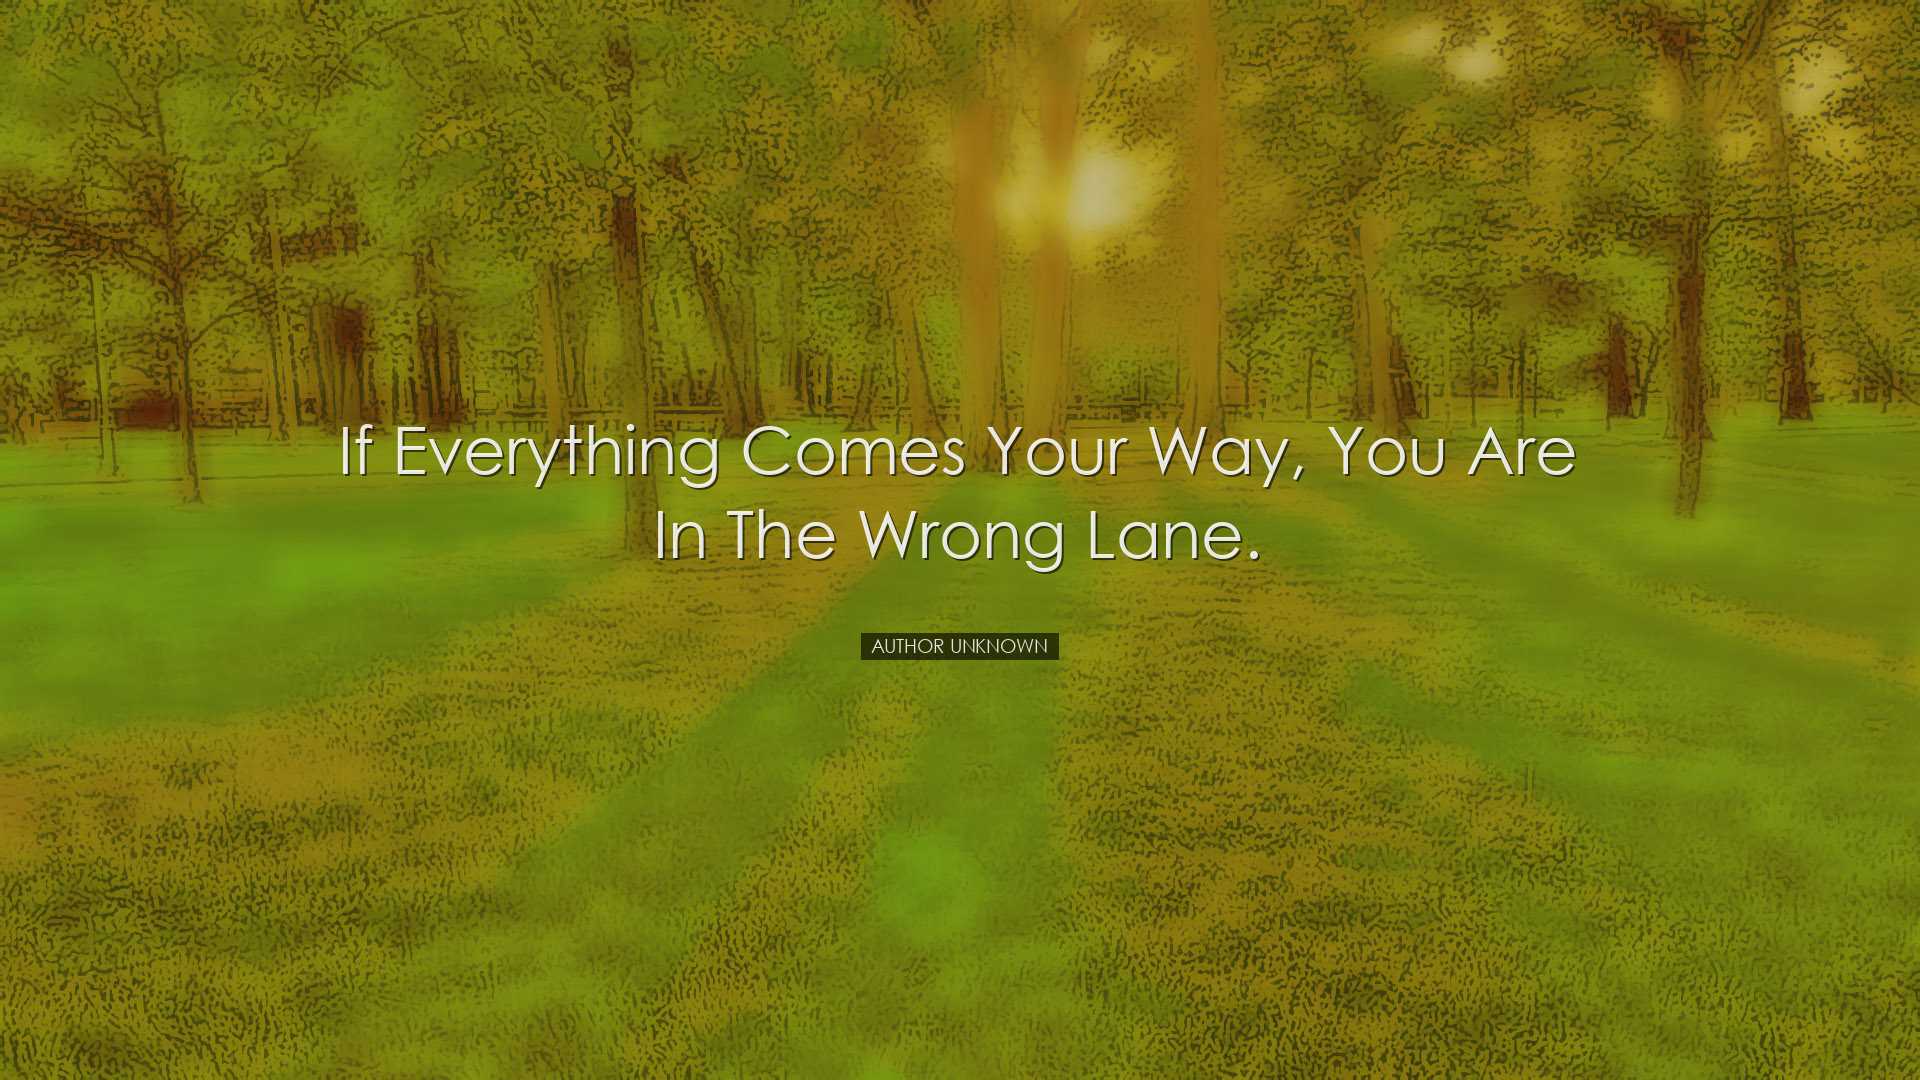 If everything comes your way, you are in the wrong lane. - Author